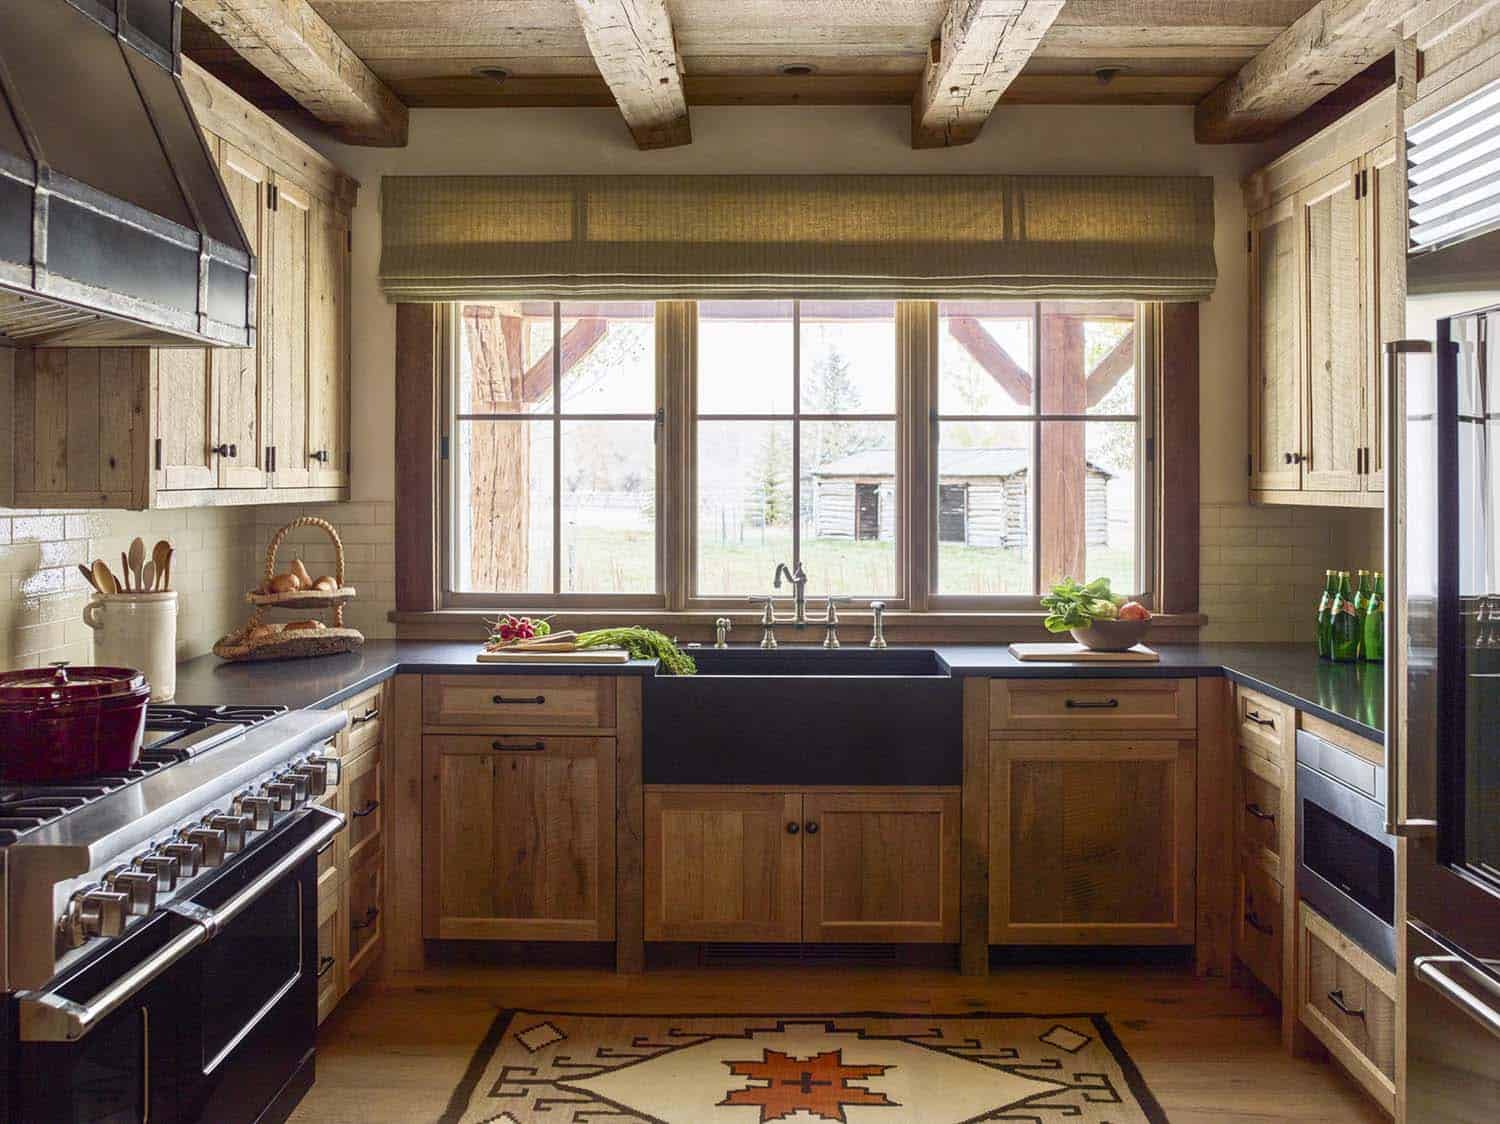 modern rustic kitchen with wood ceiling beams